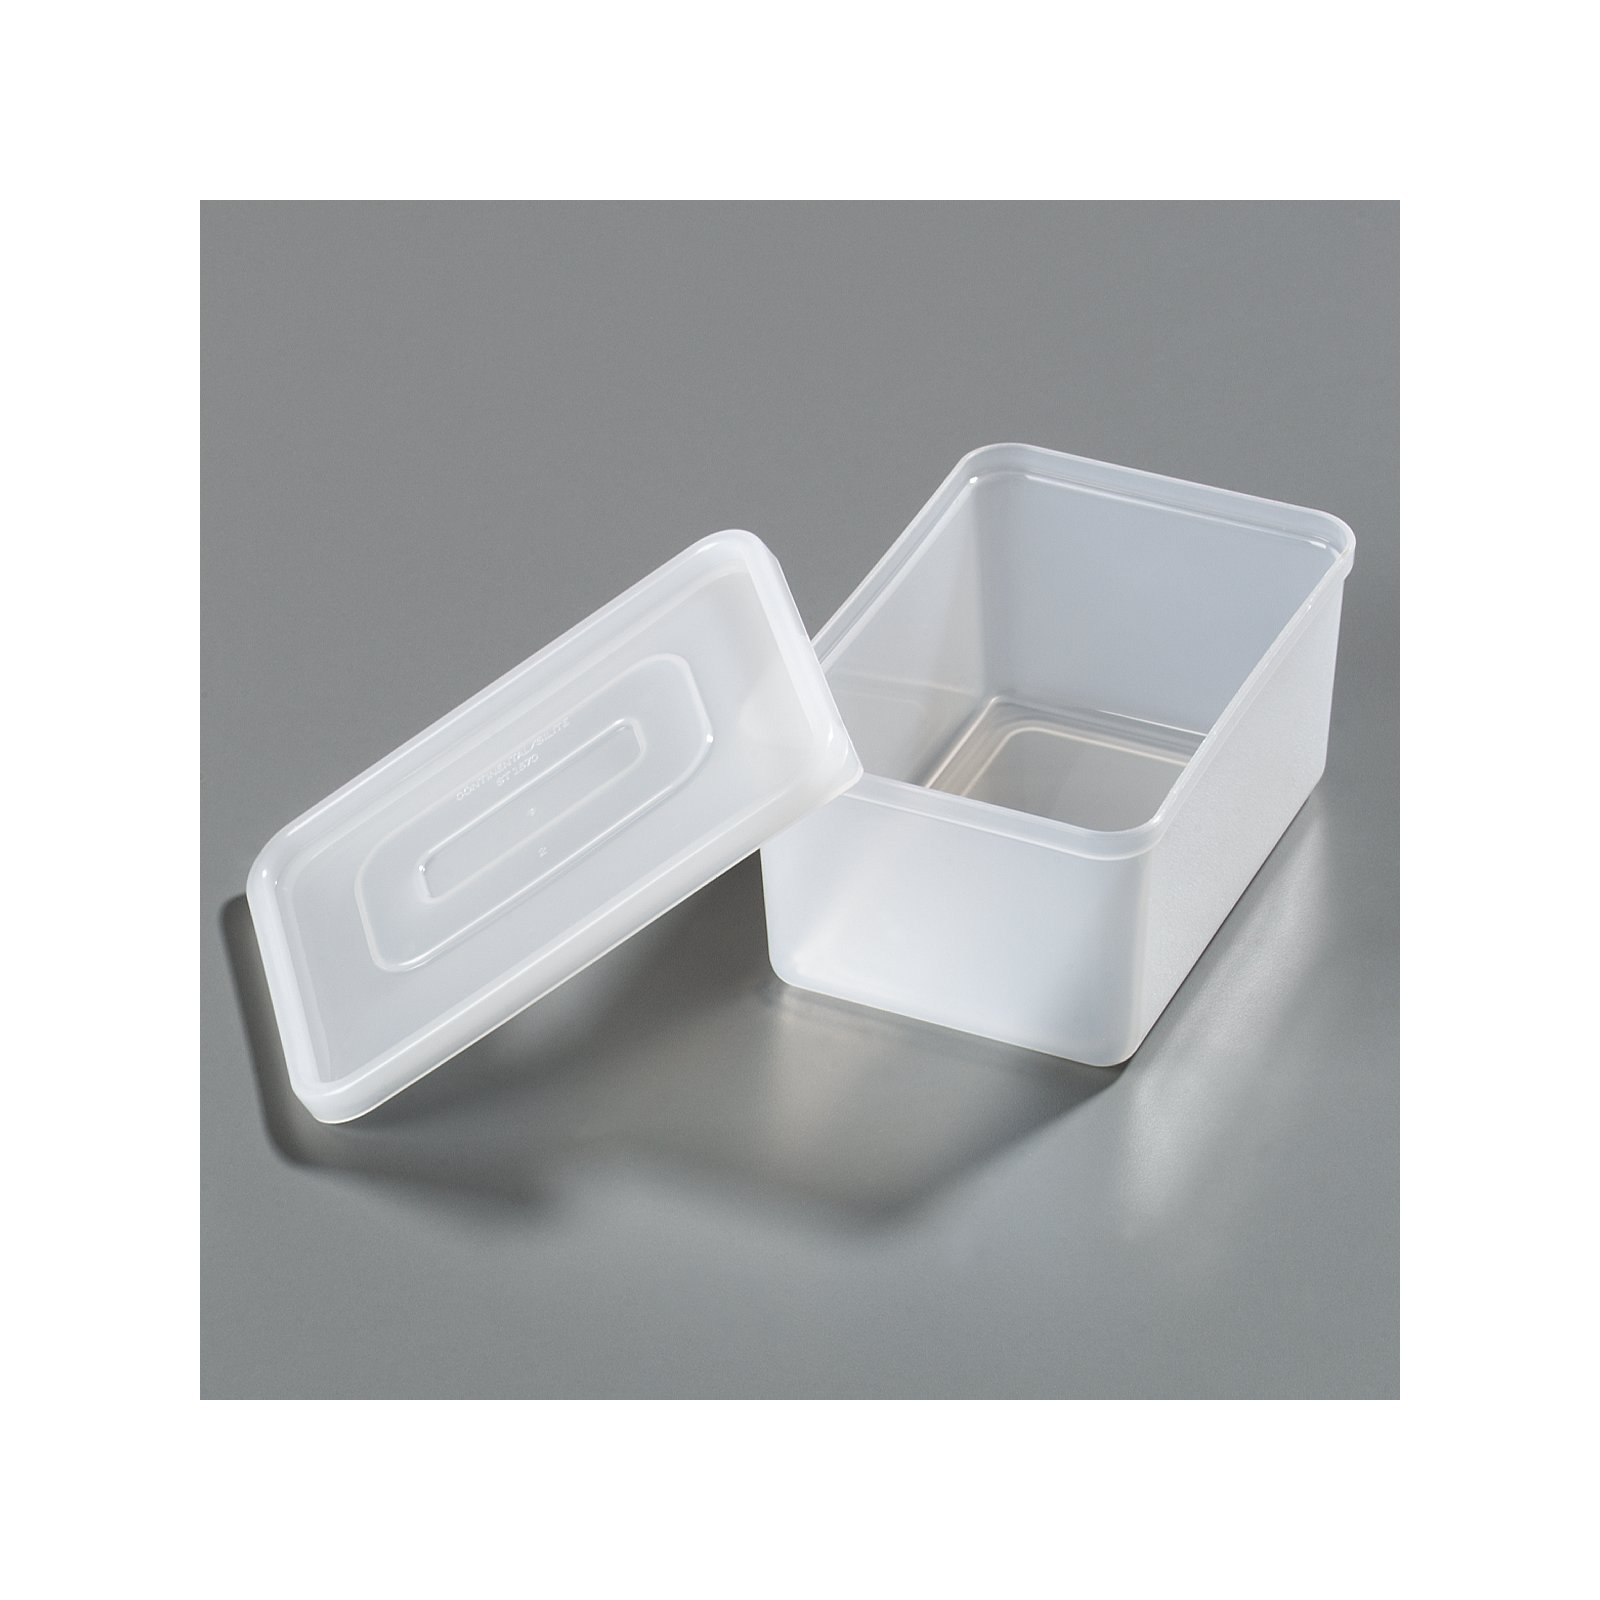 SS10702 - Replacement 1-1/4 Pint Containers/Lids 5-1/4, 3-3/4, 2